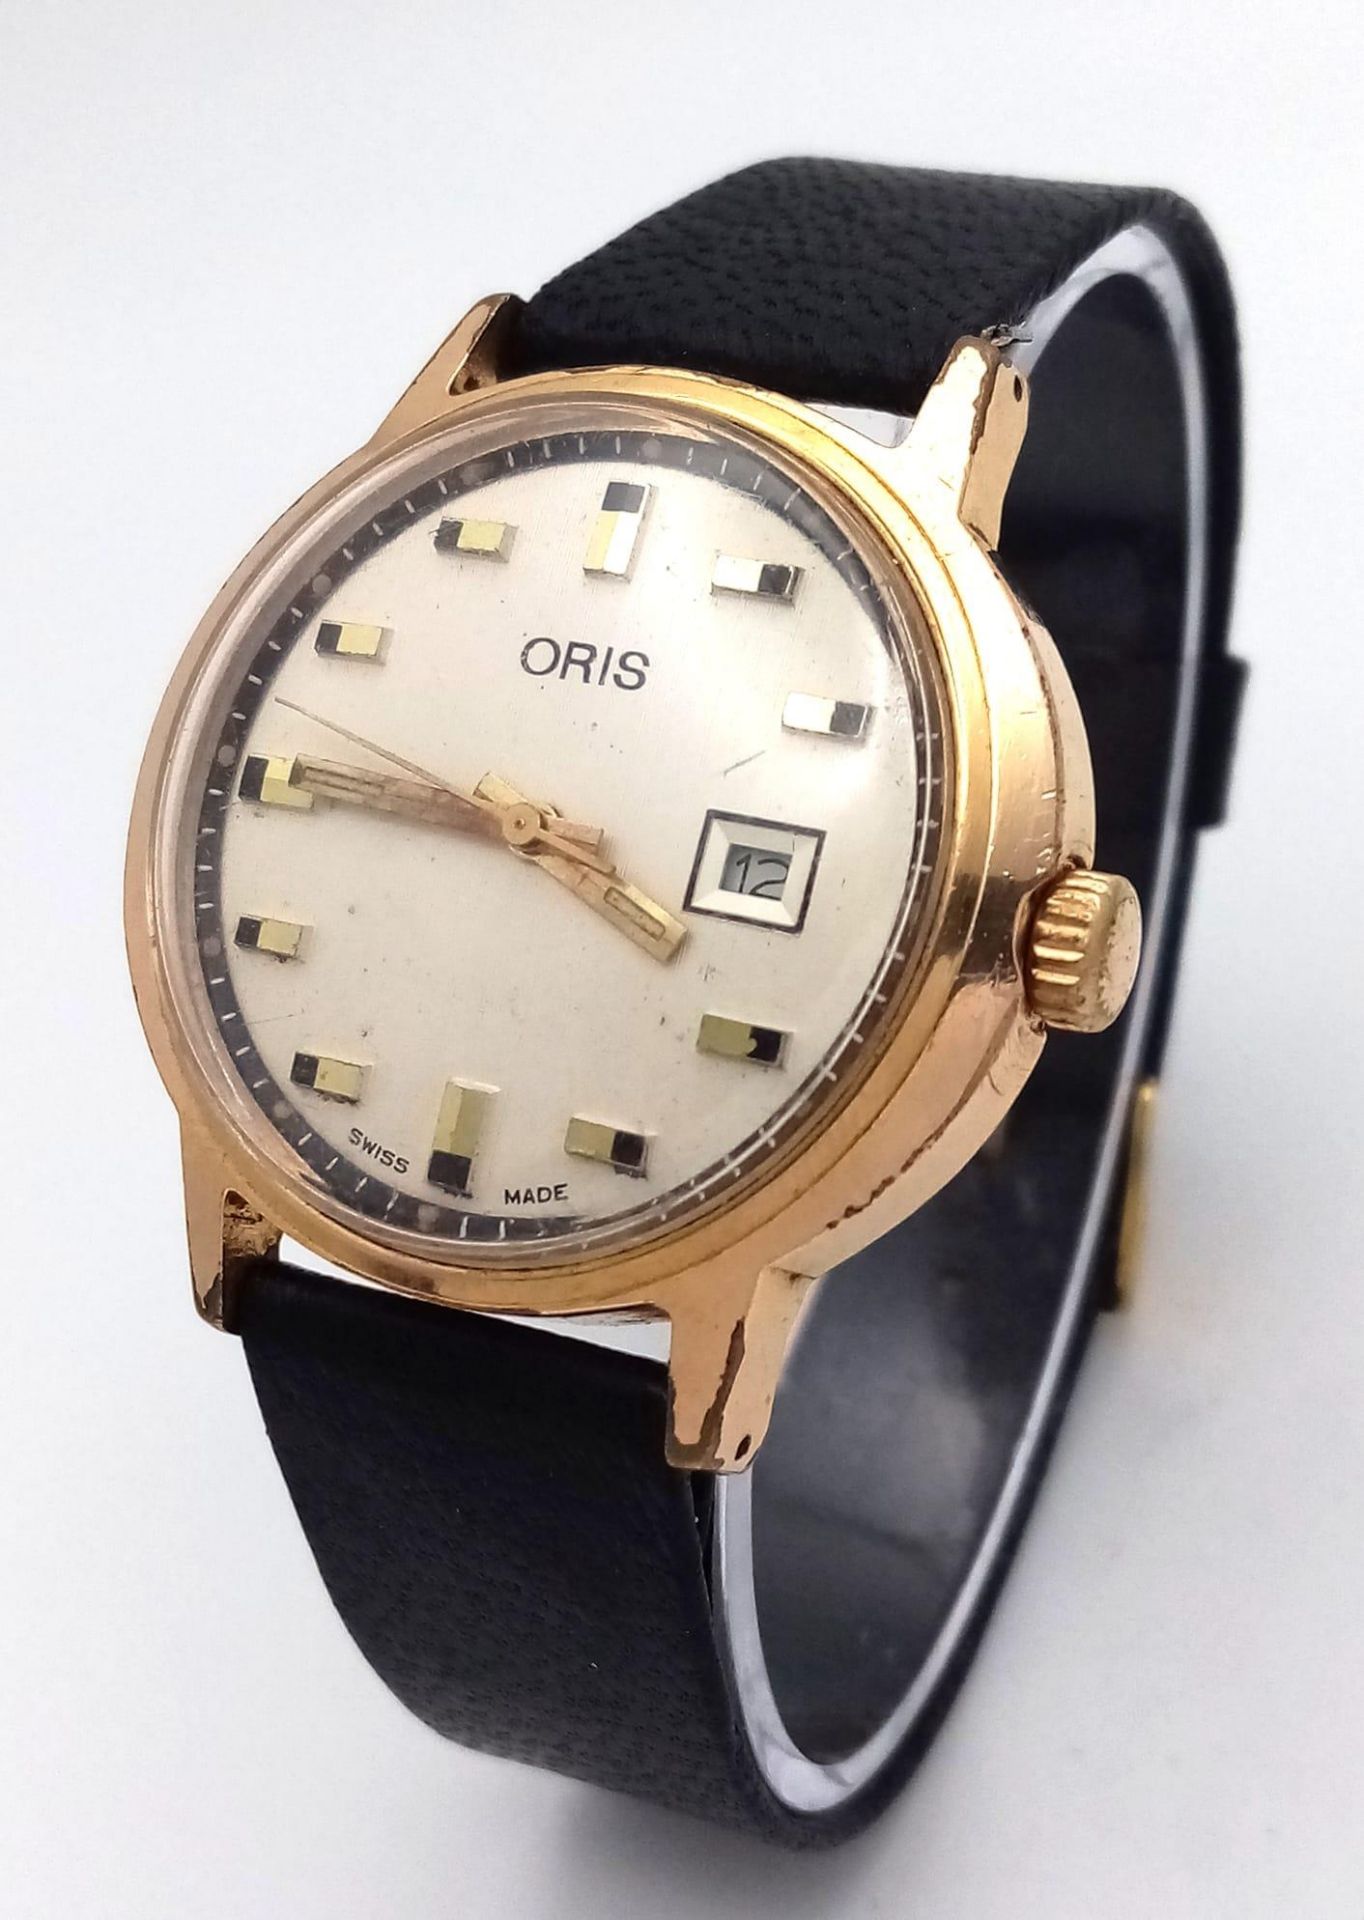 A Vintage Oris Gents Watch. Mechanical movement. Not currently working so A/F.